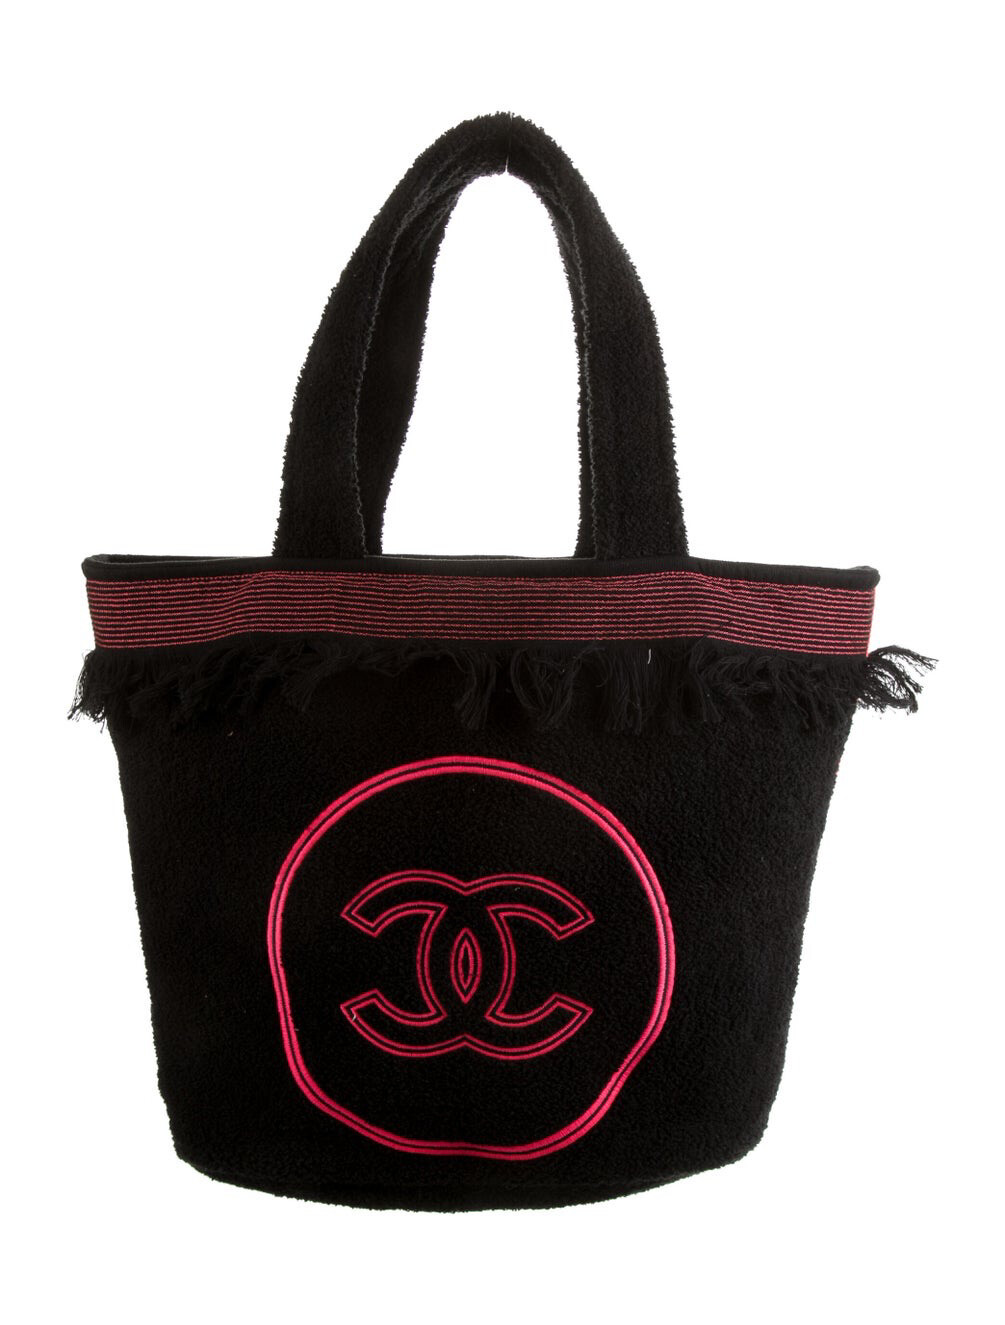 Chanel Towel Bag Black with Neon Pink, with Pouch and Towel, New MA001